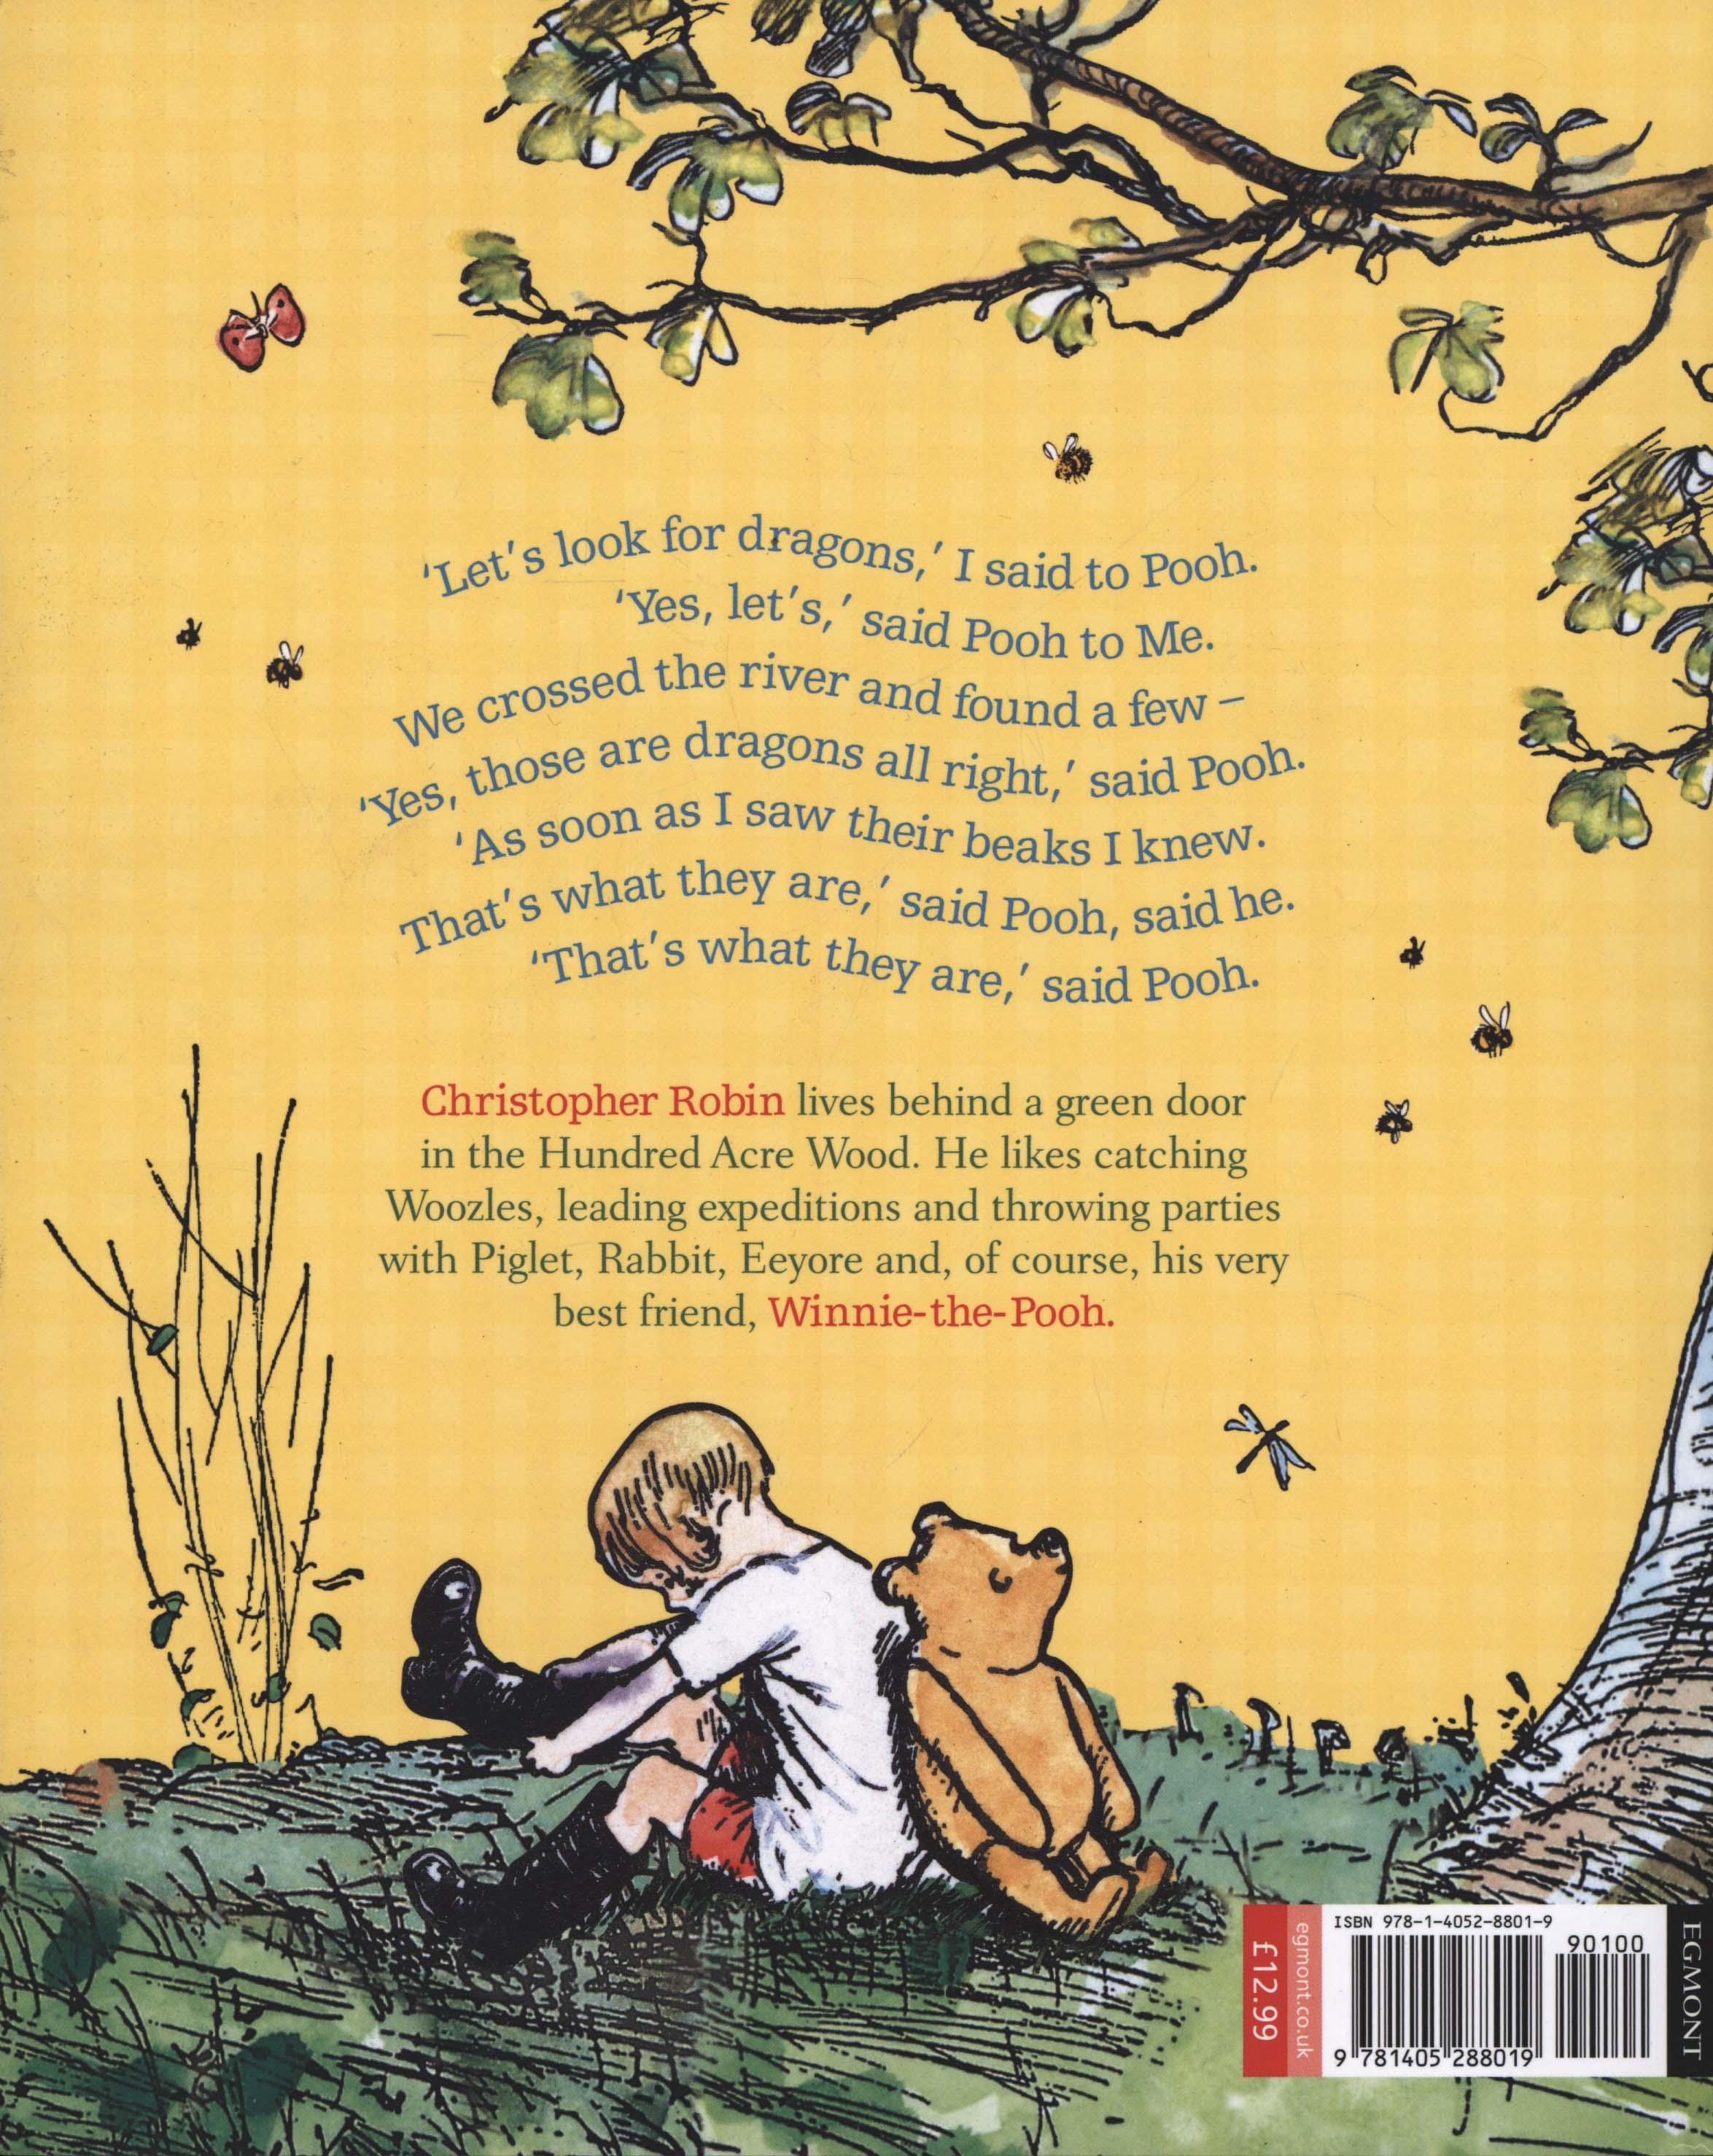 Winnie-the-Pooh: The Christopher Robin Collection (Tales of